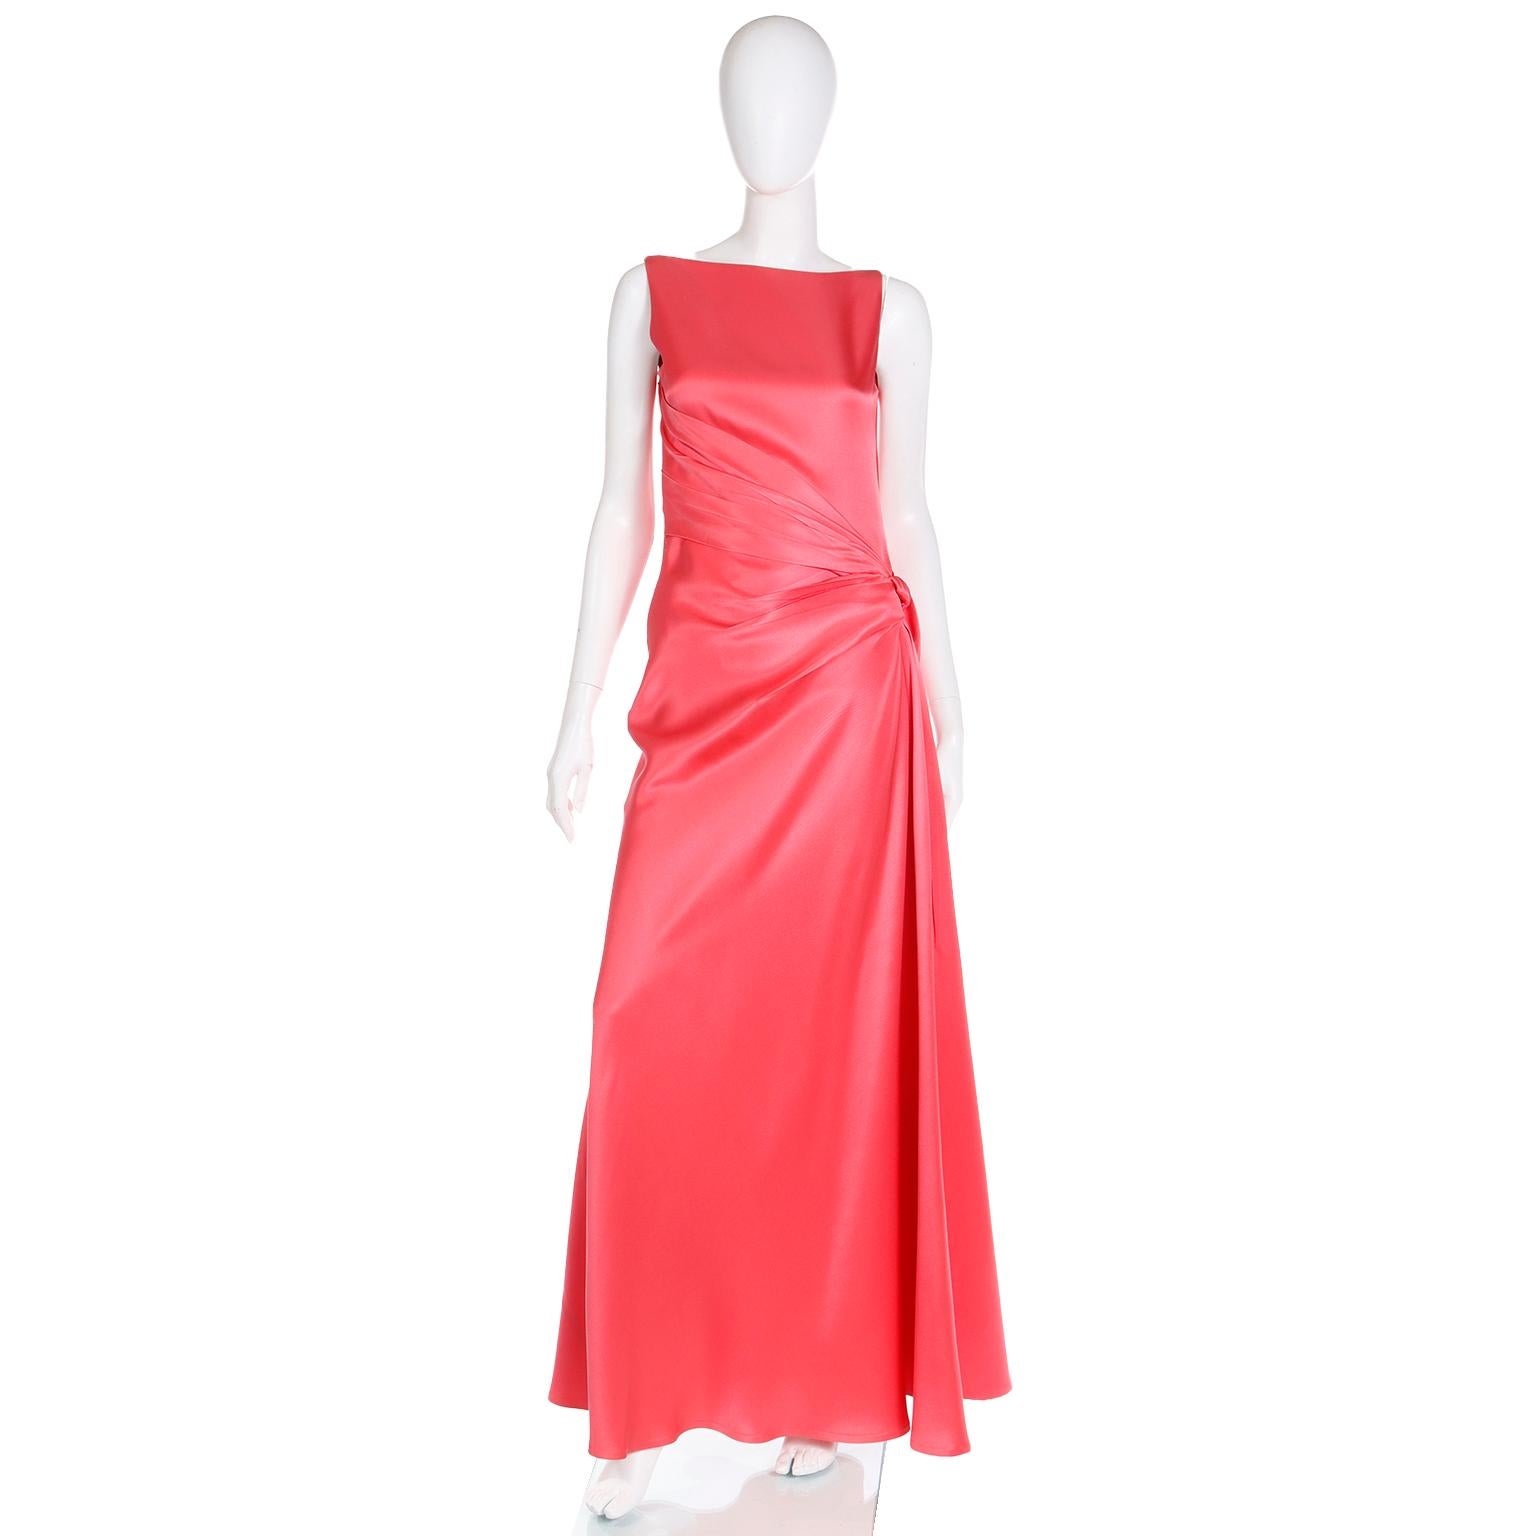 This is such an elegant vintage 1990's Bill Blass salmon pink silk column evening dress. Bill Blass dressed some of the most sophisticated, high profile women in the world and his attention to detail is exceptional. We love vintage Bill Blass gowns